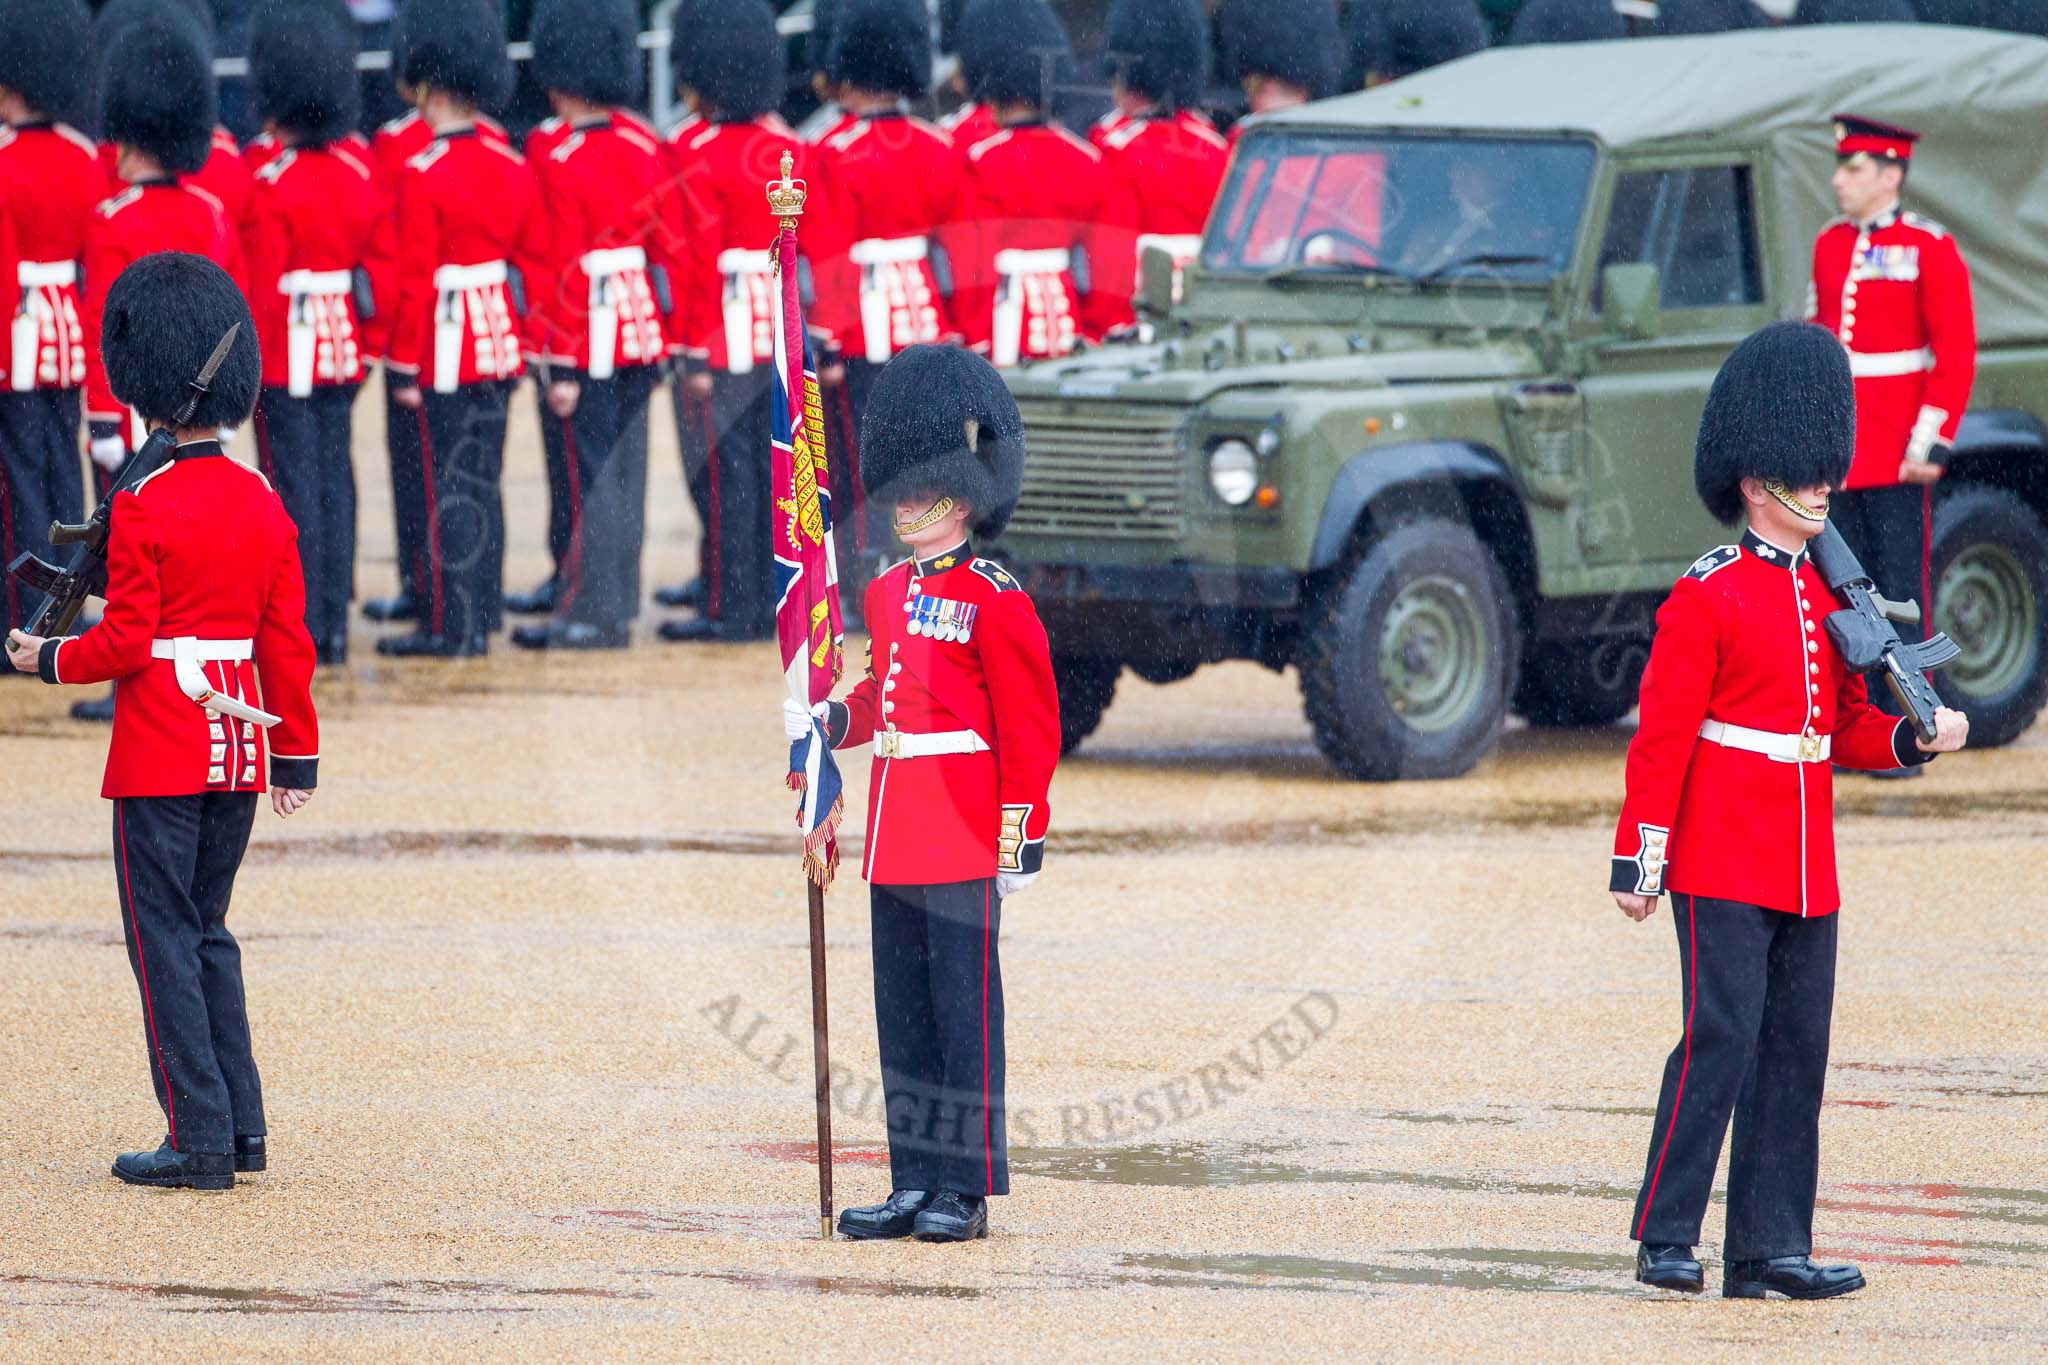 The Colonel's Review 2014.
Horse Guards Parade, Westminster,
London,

United Kingdom,
on 07 June 2014 at 10:29, image #137